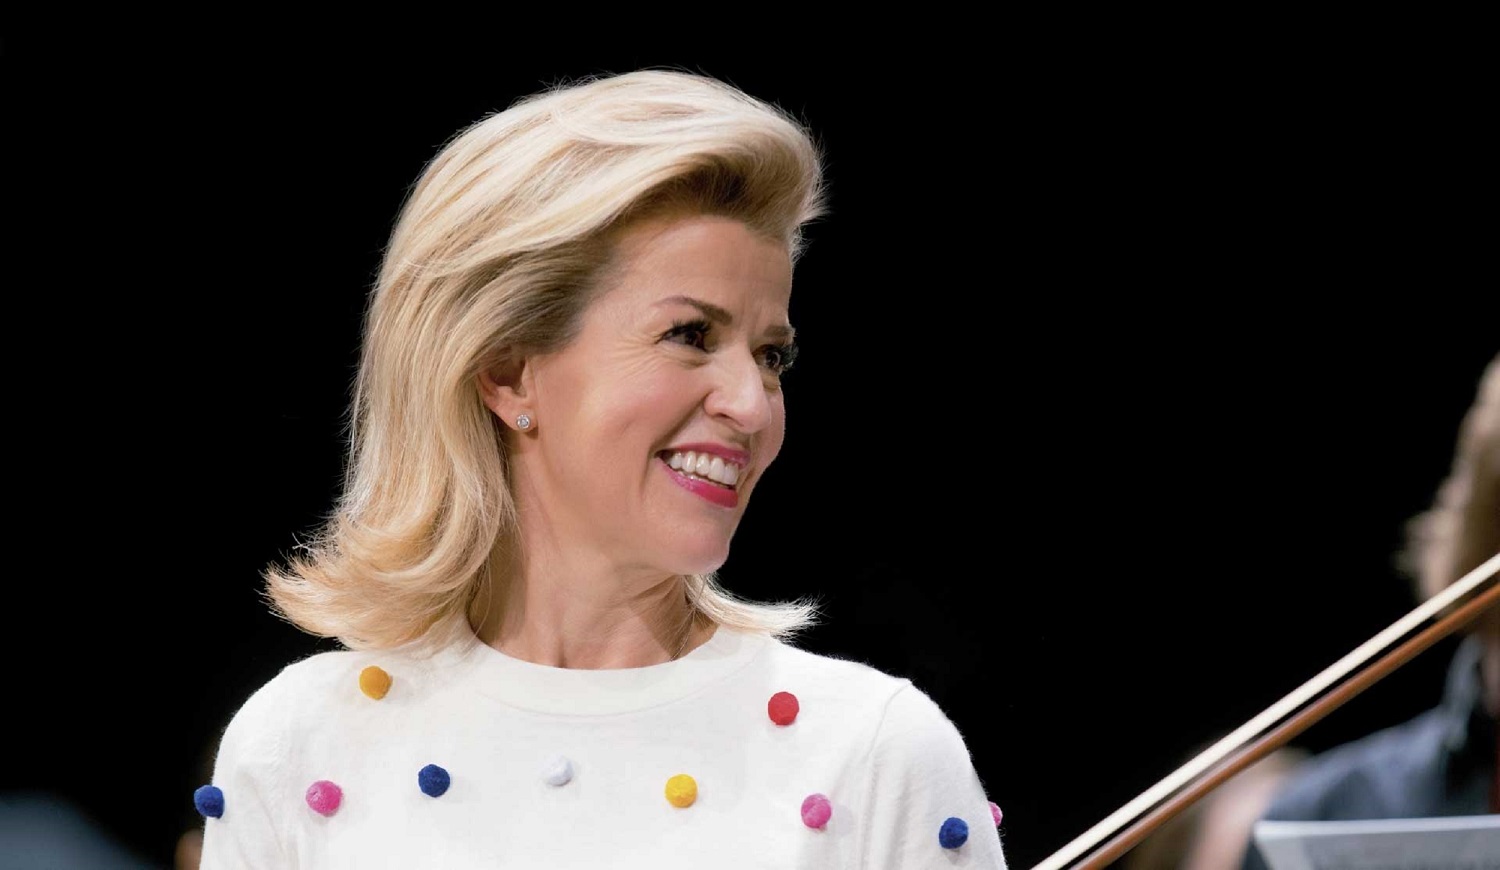 Anne-Sophie Mutter can be seen in side profile. She is wearing a white top with coloured dots and is laughing.